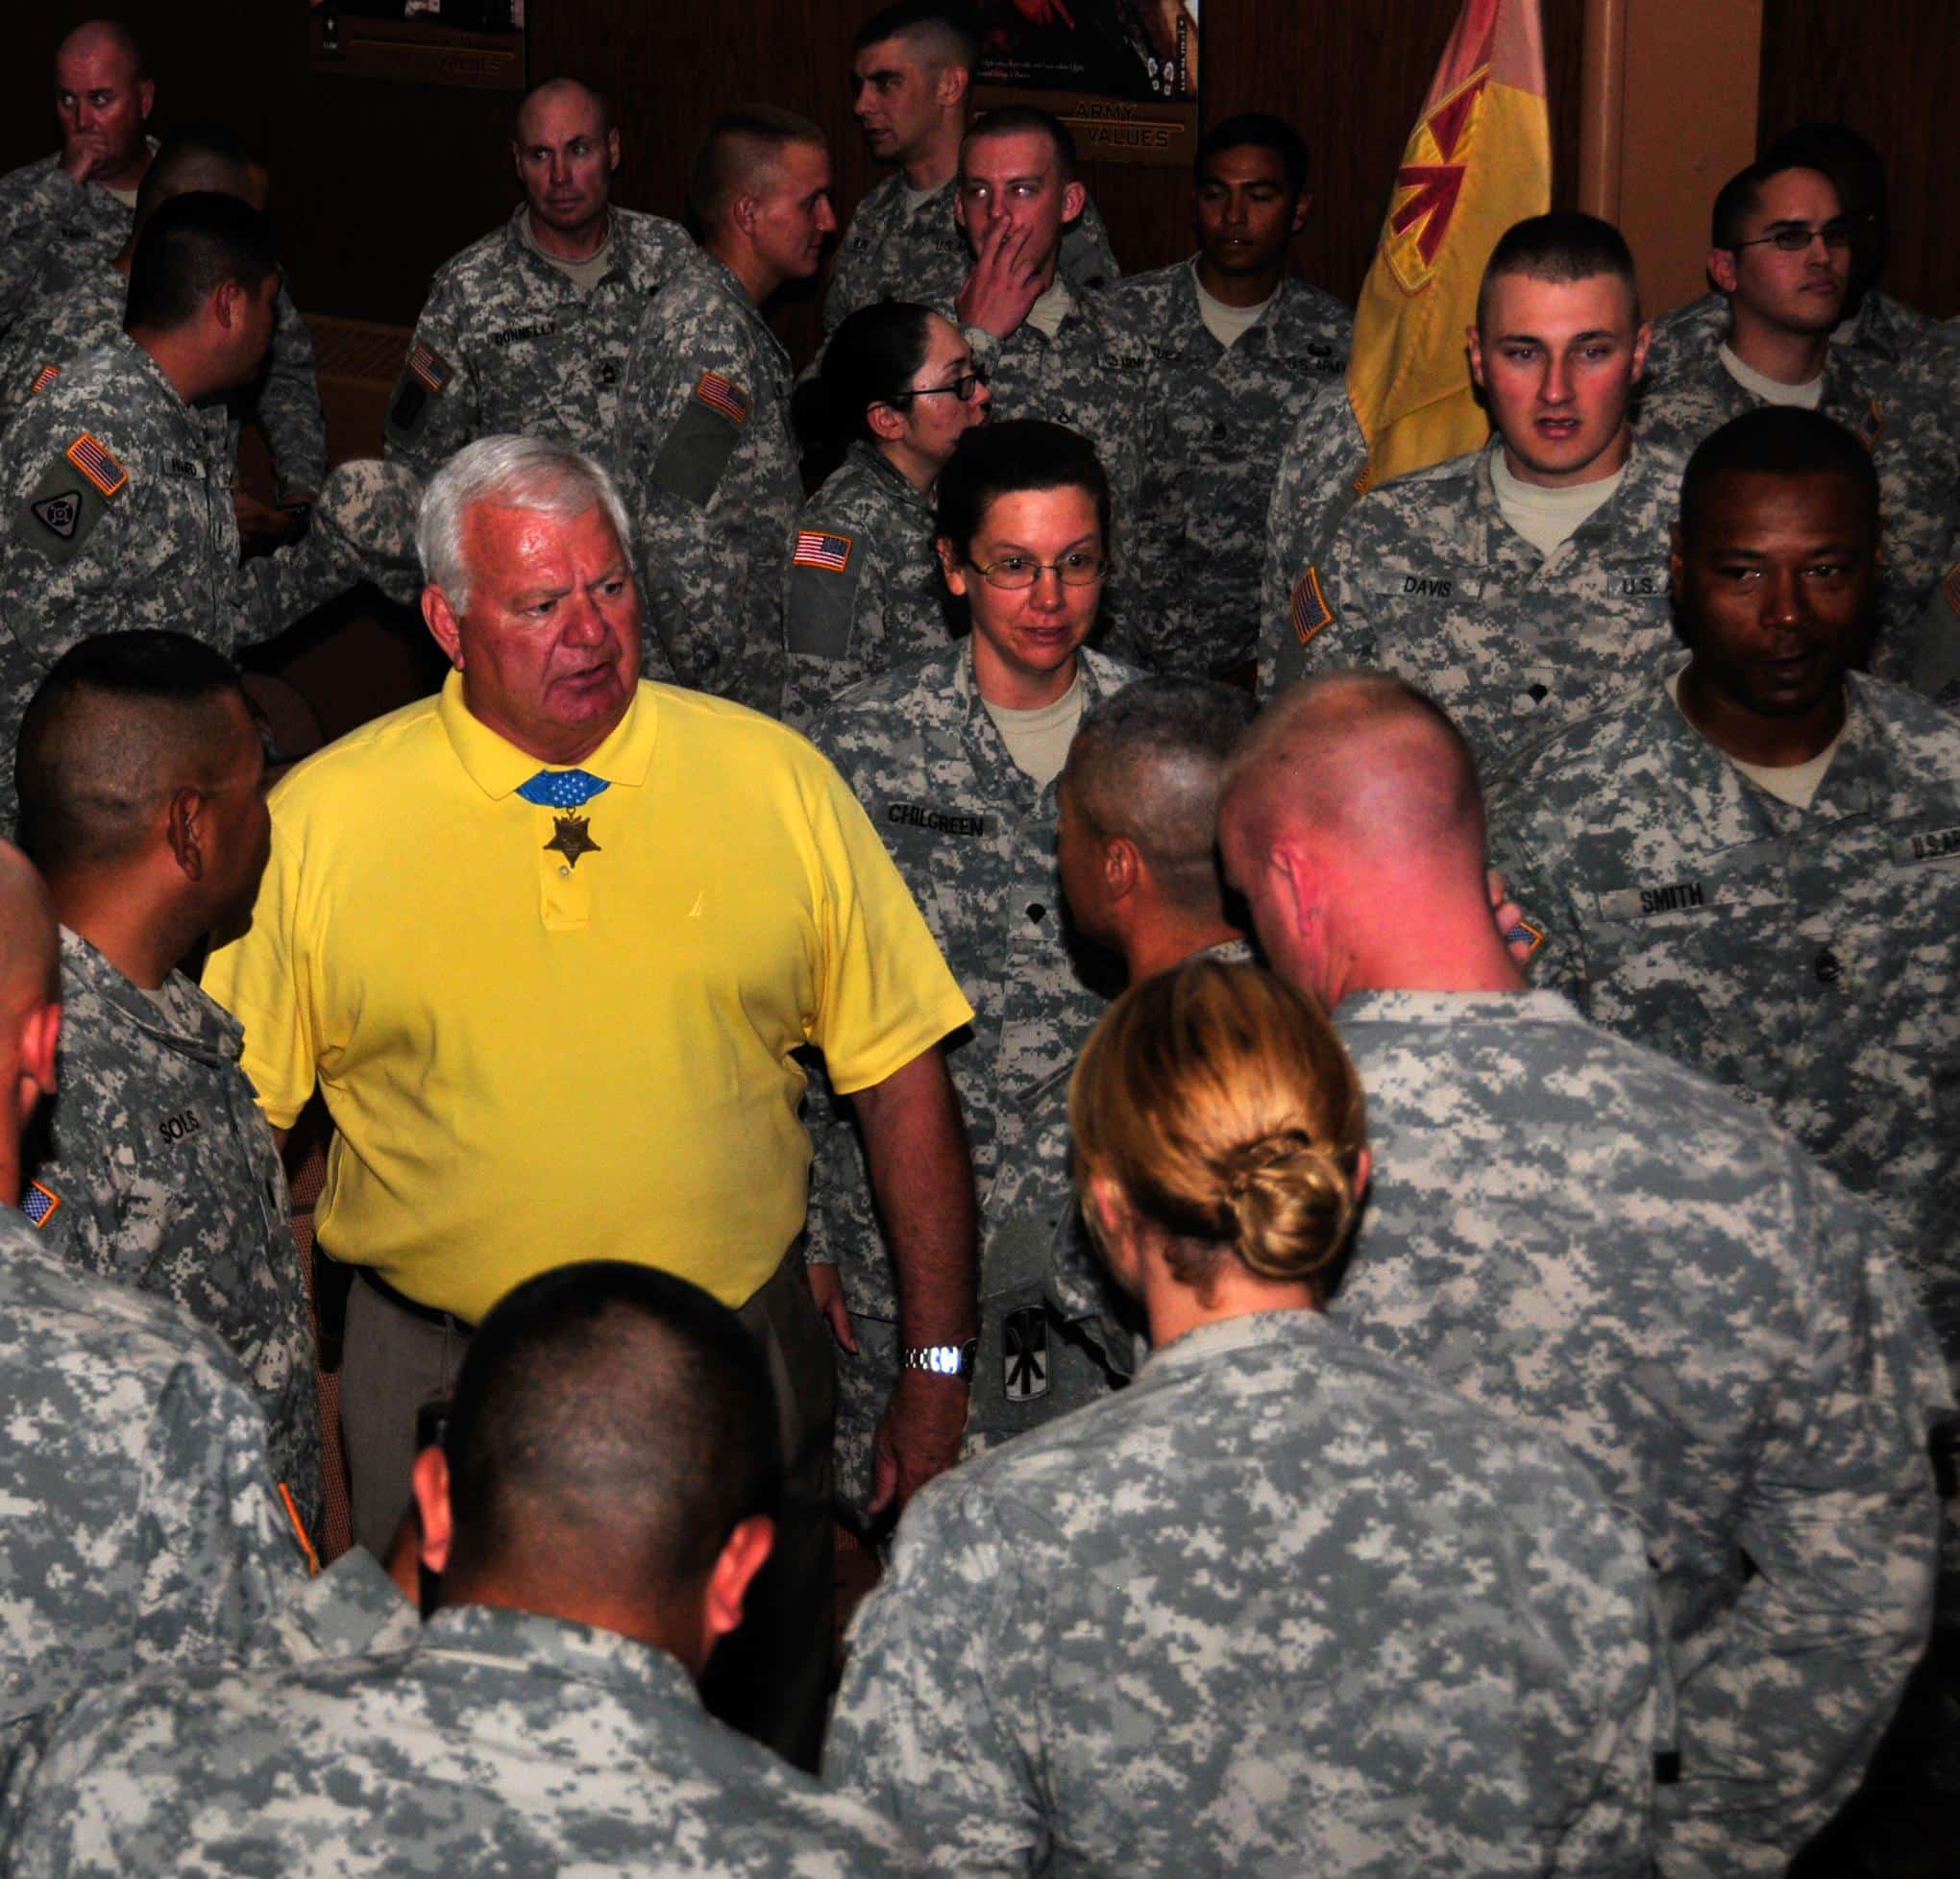 Medal of Honor recipient, retired Navy SEAL Lt. Michael E. Thornton, speaks with soldiers assigned to the 11th Air Defense Artillery Brigade, 32nd Army Air and Missile Defense Command at Fort Bliss, Texas, June 7, 2012. Thornton visited the soldiers of the 11th ADA BDE and shared with them his story of camaraderie, selfless service and his heroic actions during his last tour of duty in Vietnam resulting in saving the life of a fellow SEAL.